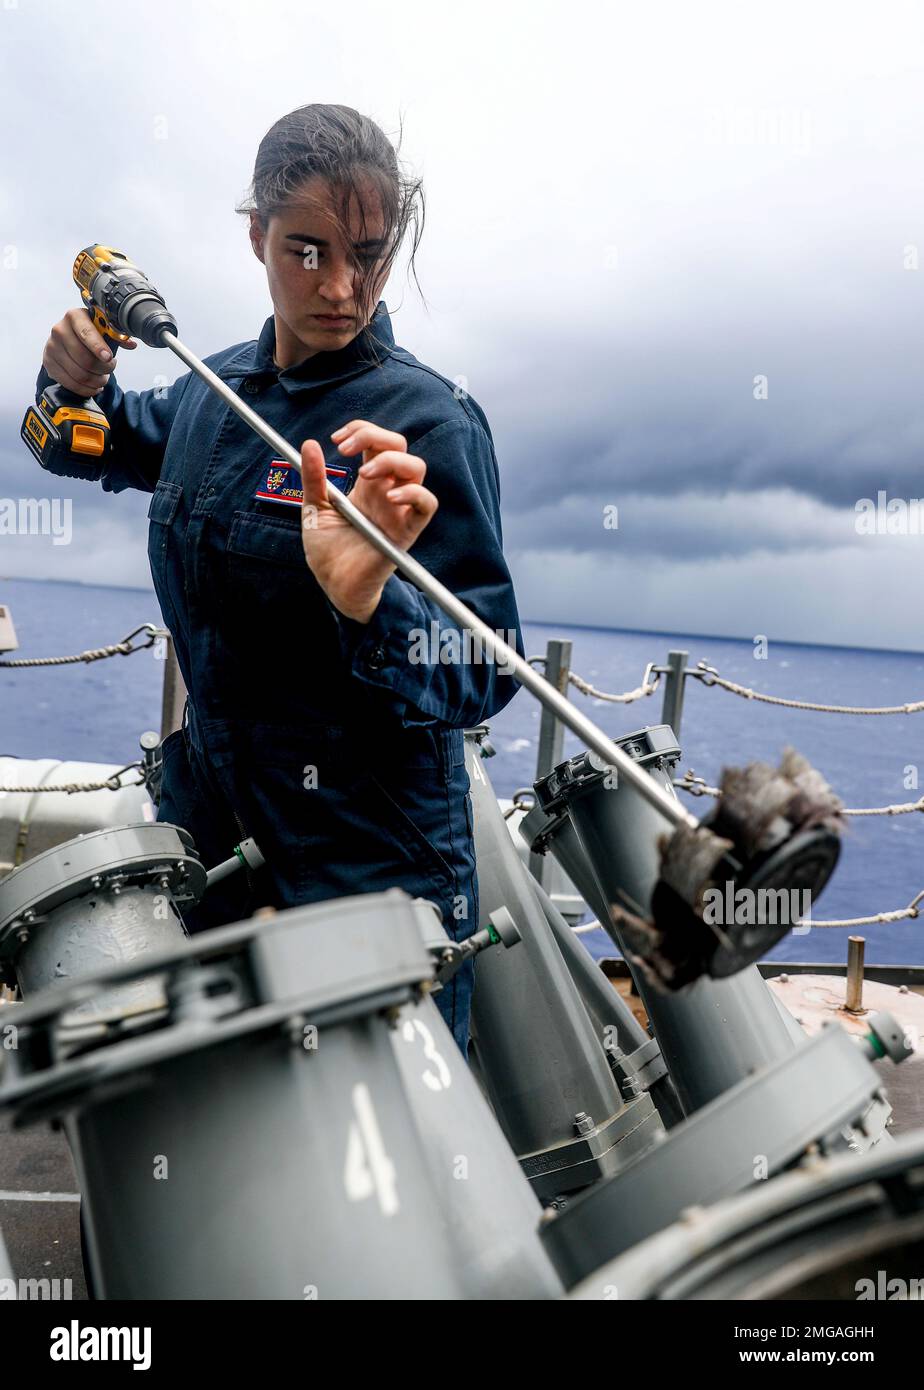 PHILIPPINE SEA (Aug. 22, 2022) – Lt. j.g. Spencer McVeigh, from San Diego, cleans the launching tubes of a Mark 53 decoy launching system during routine maintenance aboard the Arleigh Burke-class guided missile-destroyer USS Barry (DDG 52). Barry is assigned to Commander, Task Force 71/Destroyer Squadron (DESRON) 15, the Navy’s largest forward-deployed DESRON and the U.S. 7th Fleet’s principal surface force. Stock Photo